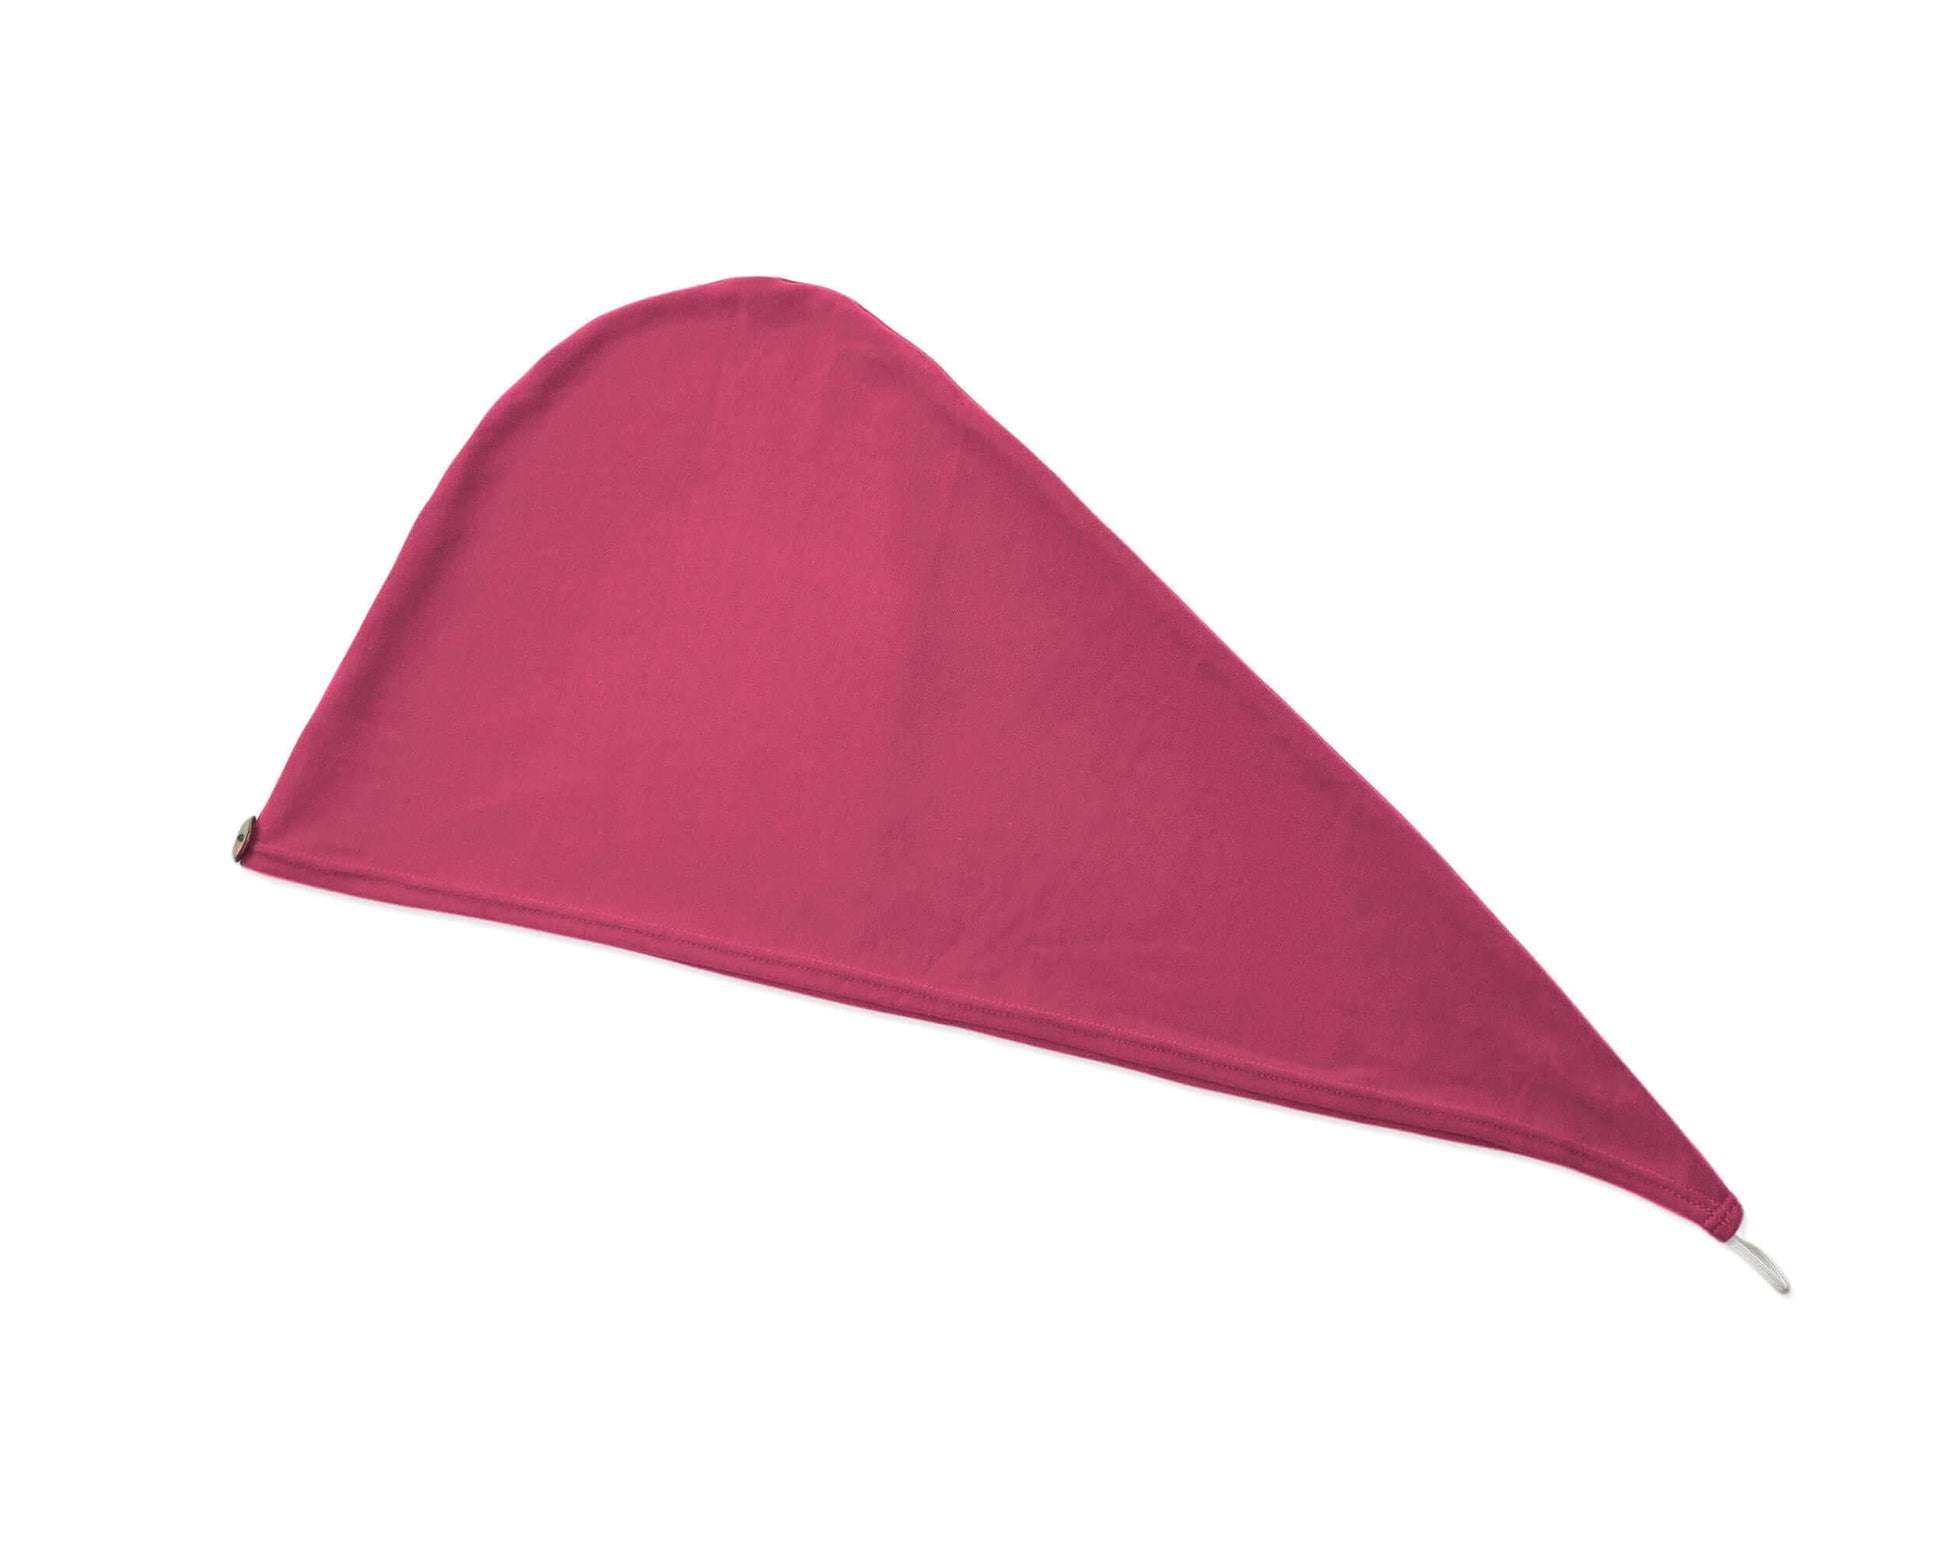 Berry Pink T-Shirt Hair Towel Hood for Curly, Wavy, and Straight Hair - Soft, Absorbent, and Eco-Friendly